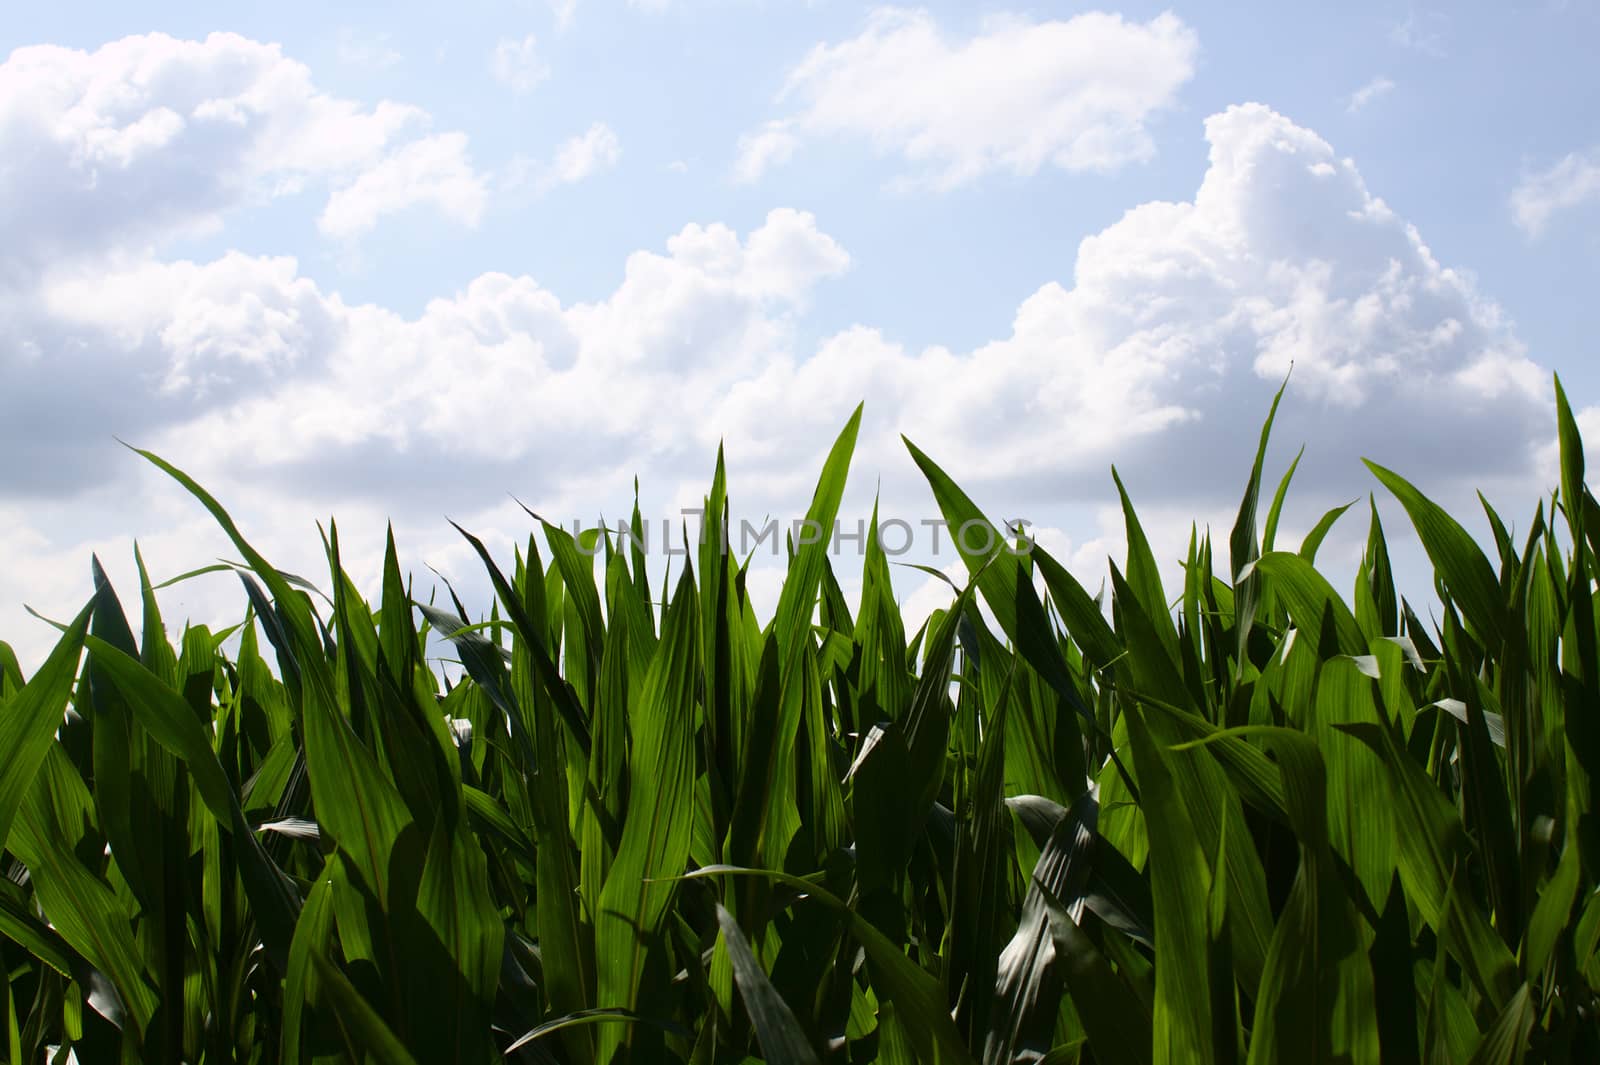 The picture shows a corn field in the summer